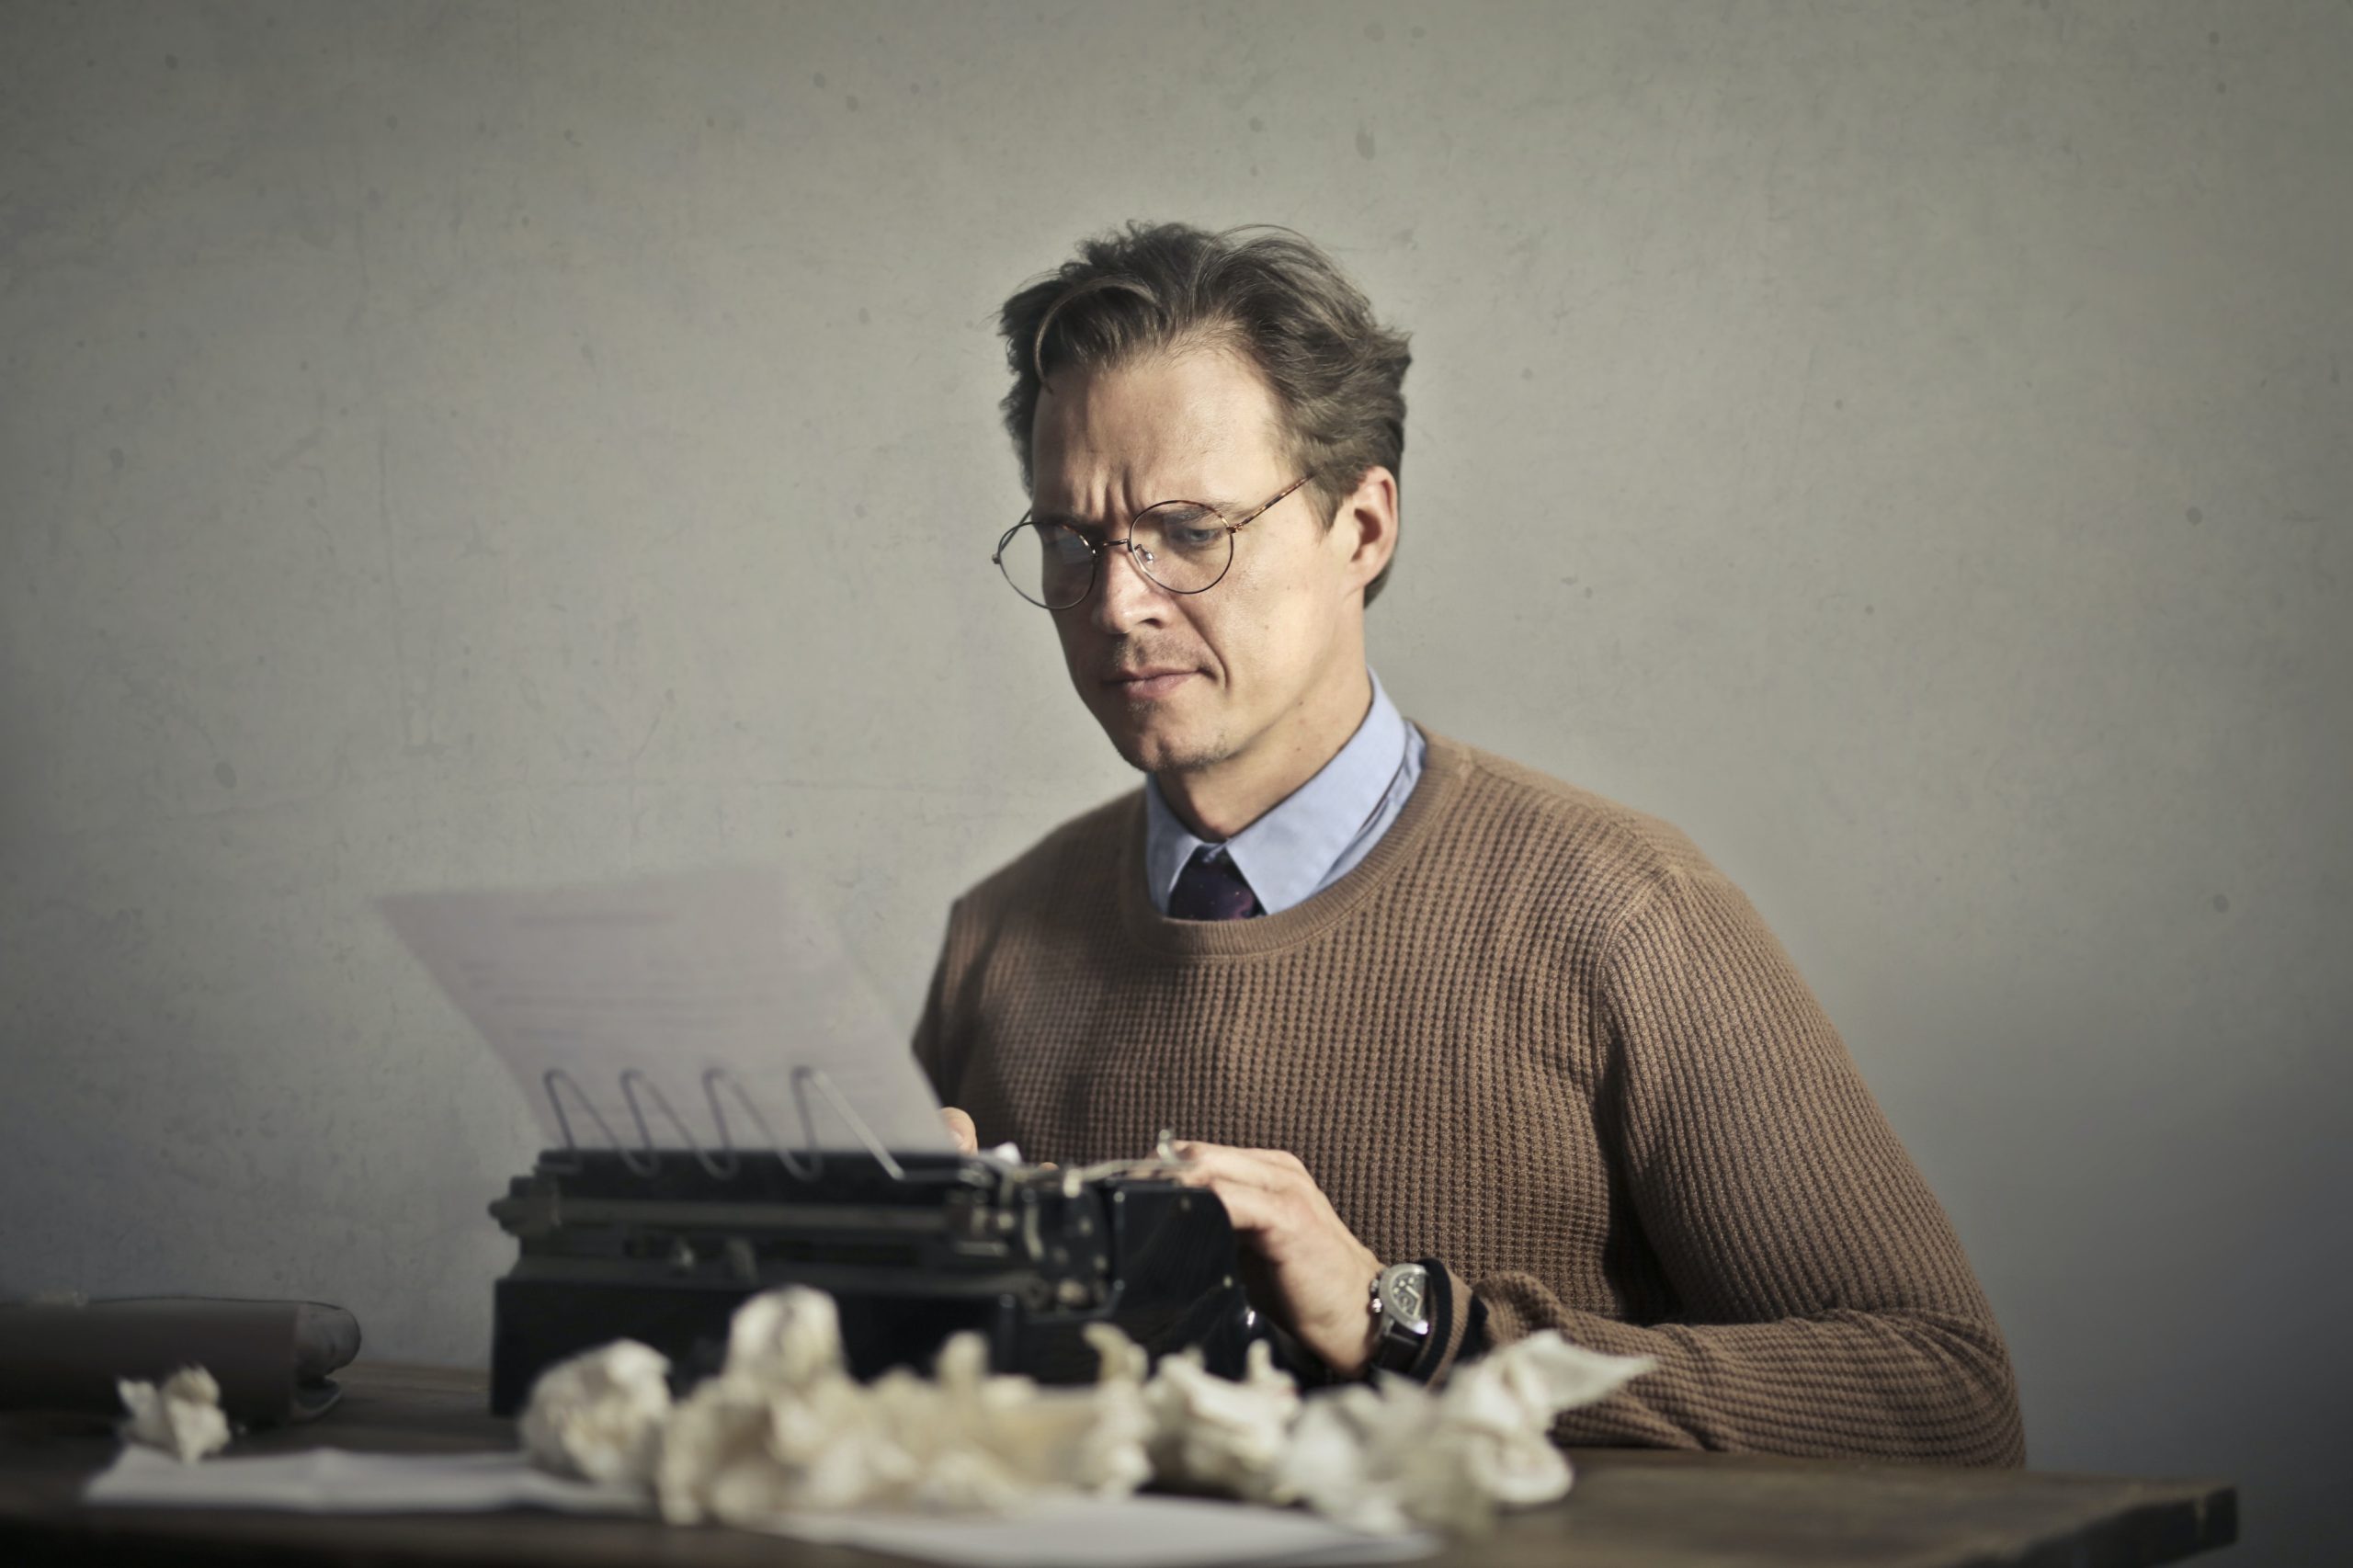 A perturbed man writing at a typewriter